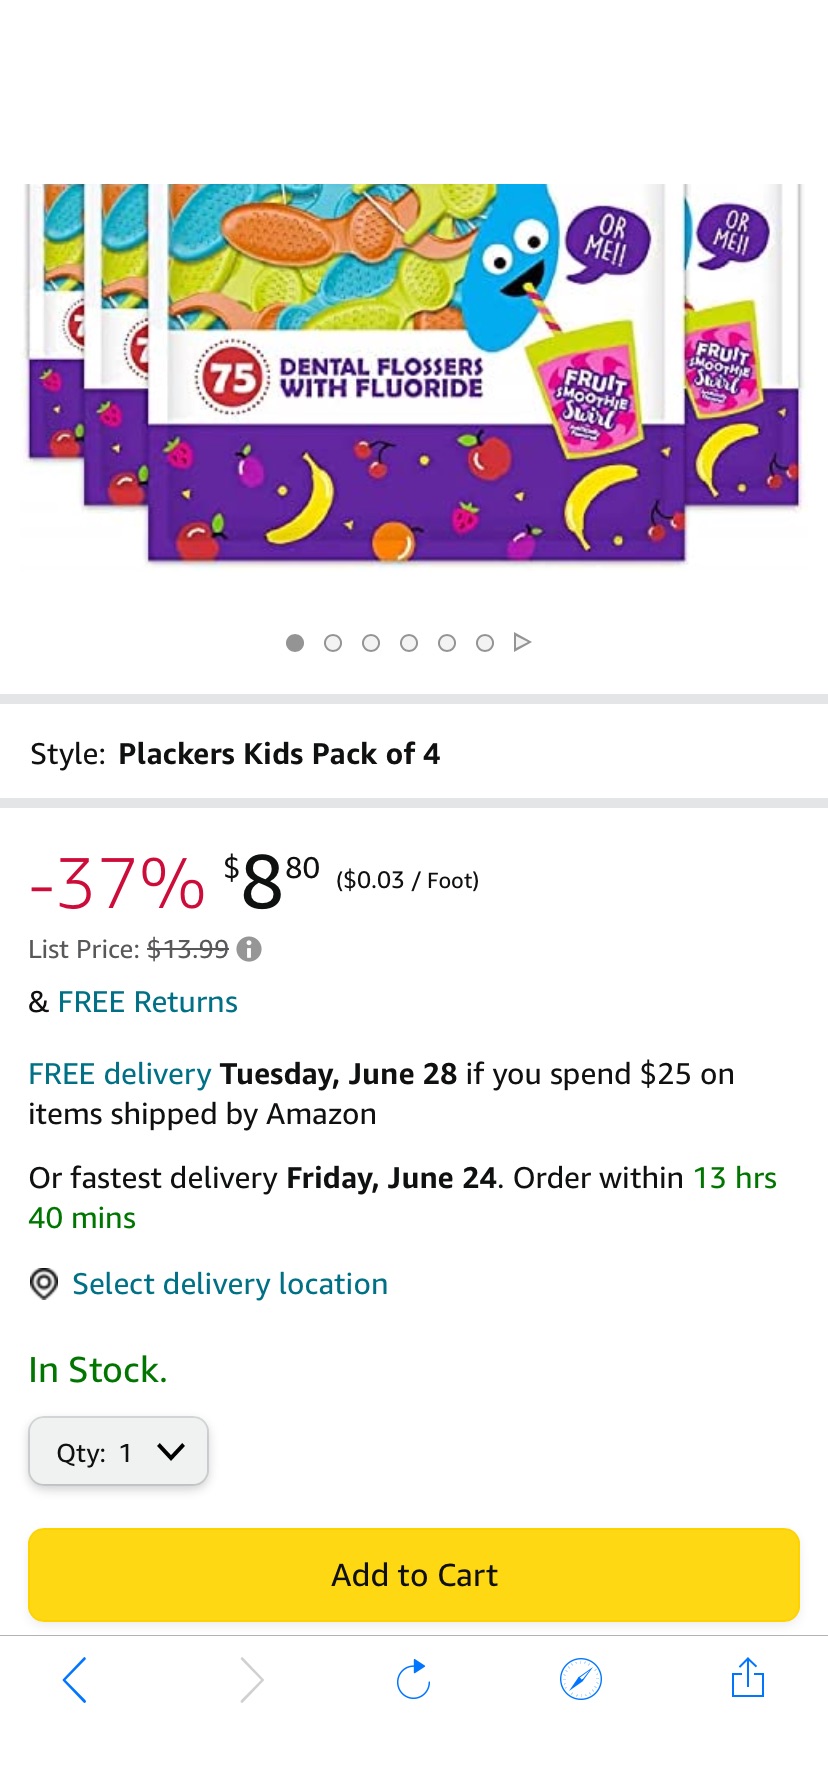 Plackers Kids Dual Gripz Flossers with Fluoride, Grip Me Handle, Fruit Smoothie Swirl Flavor, BPA Free, Colorful Floss Picks for Kids of All Ages, 75 Count (Pack of 4)